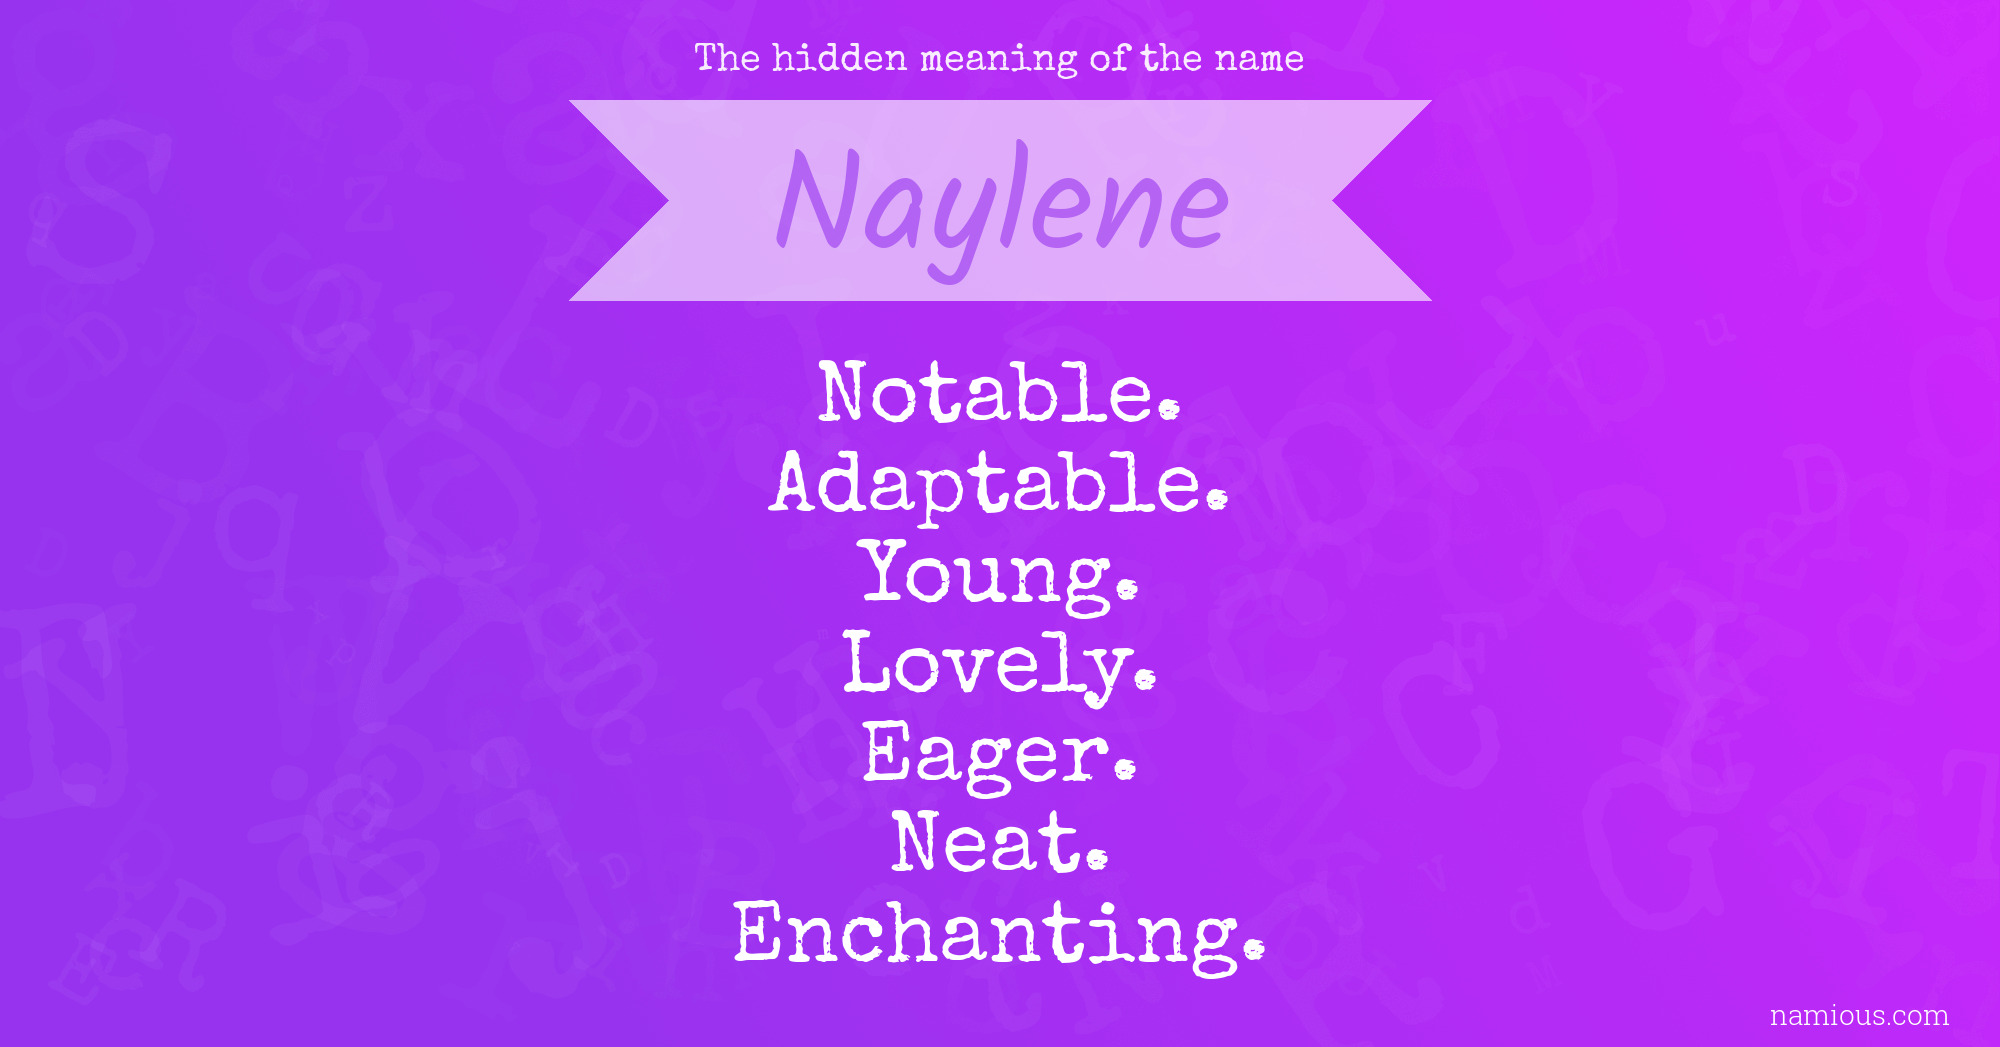 The hidden meaning of the name Naylene